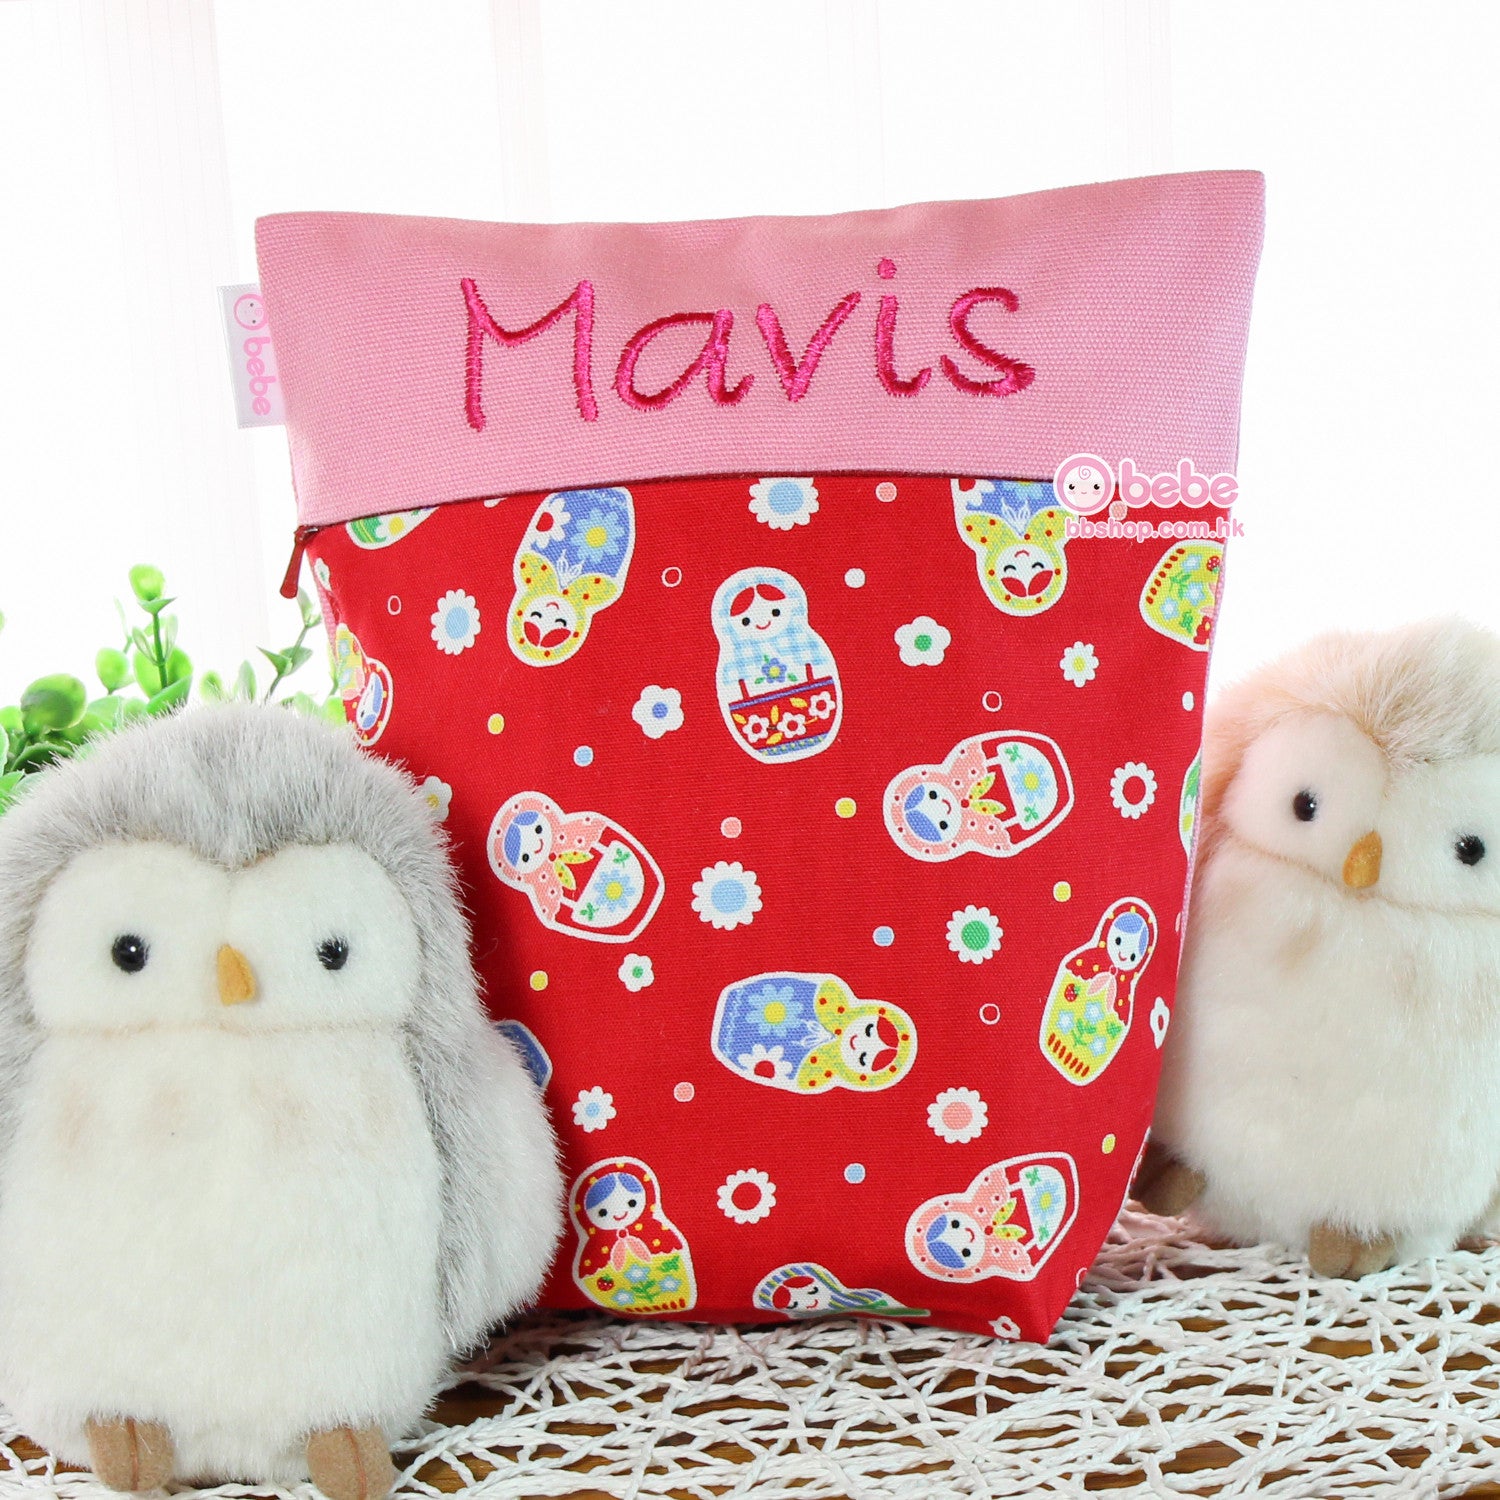 HEB256 紅色俄羅斯娃娃繡名紙尿片袋 Red Russian Dolls Personalized Diaper Pouch